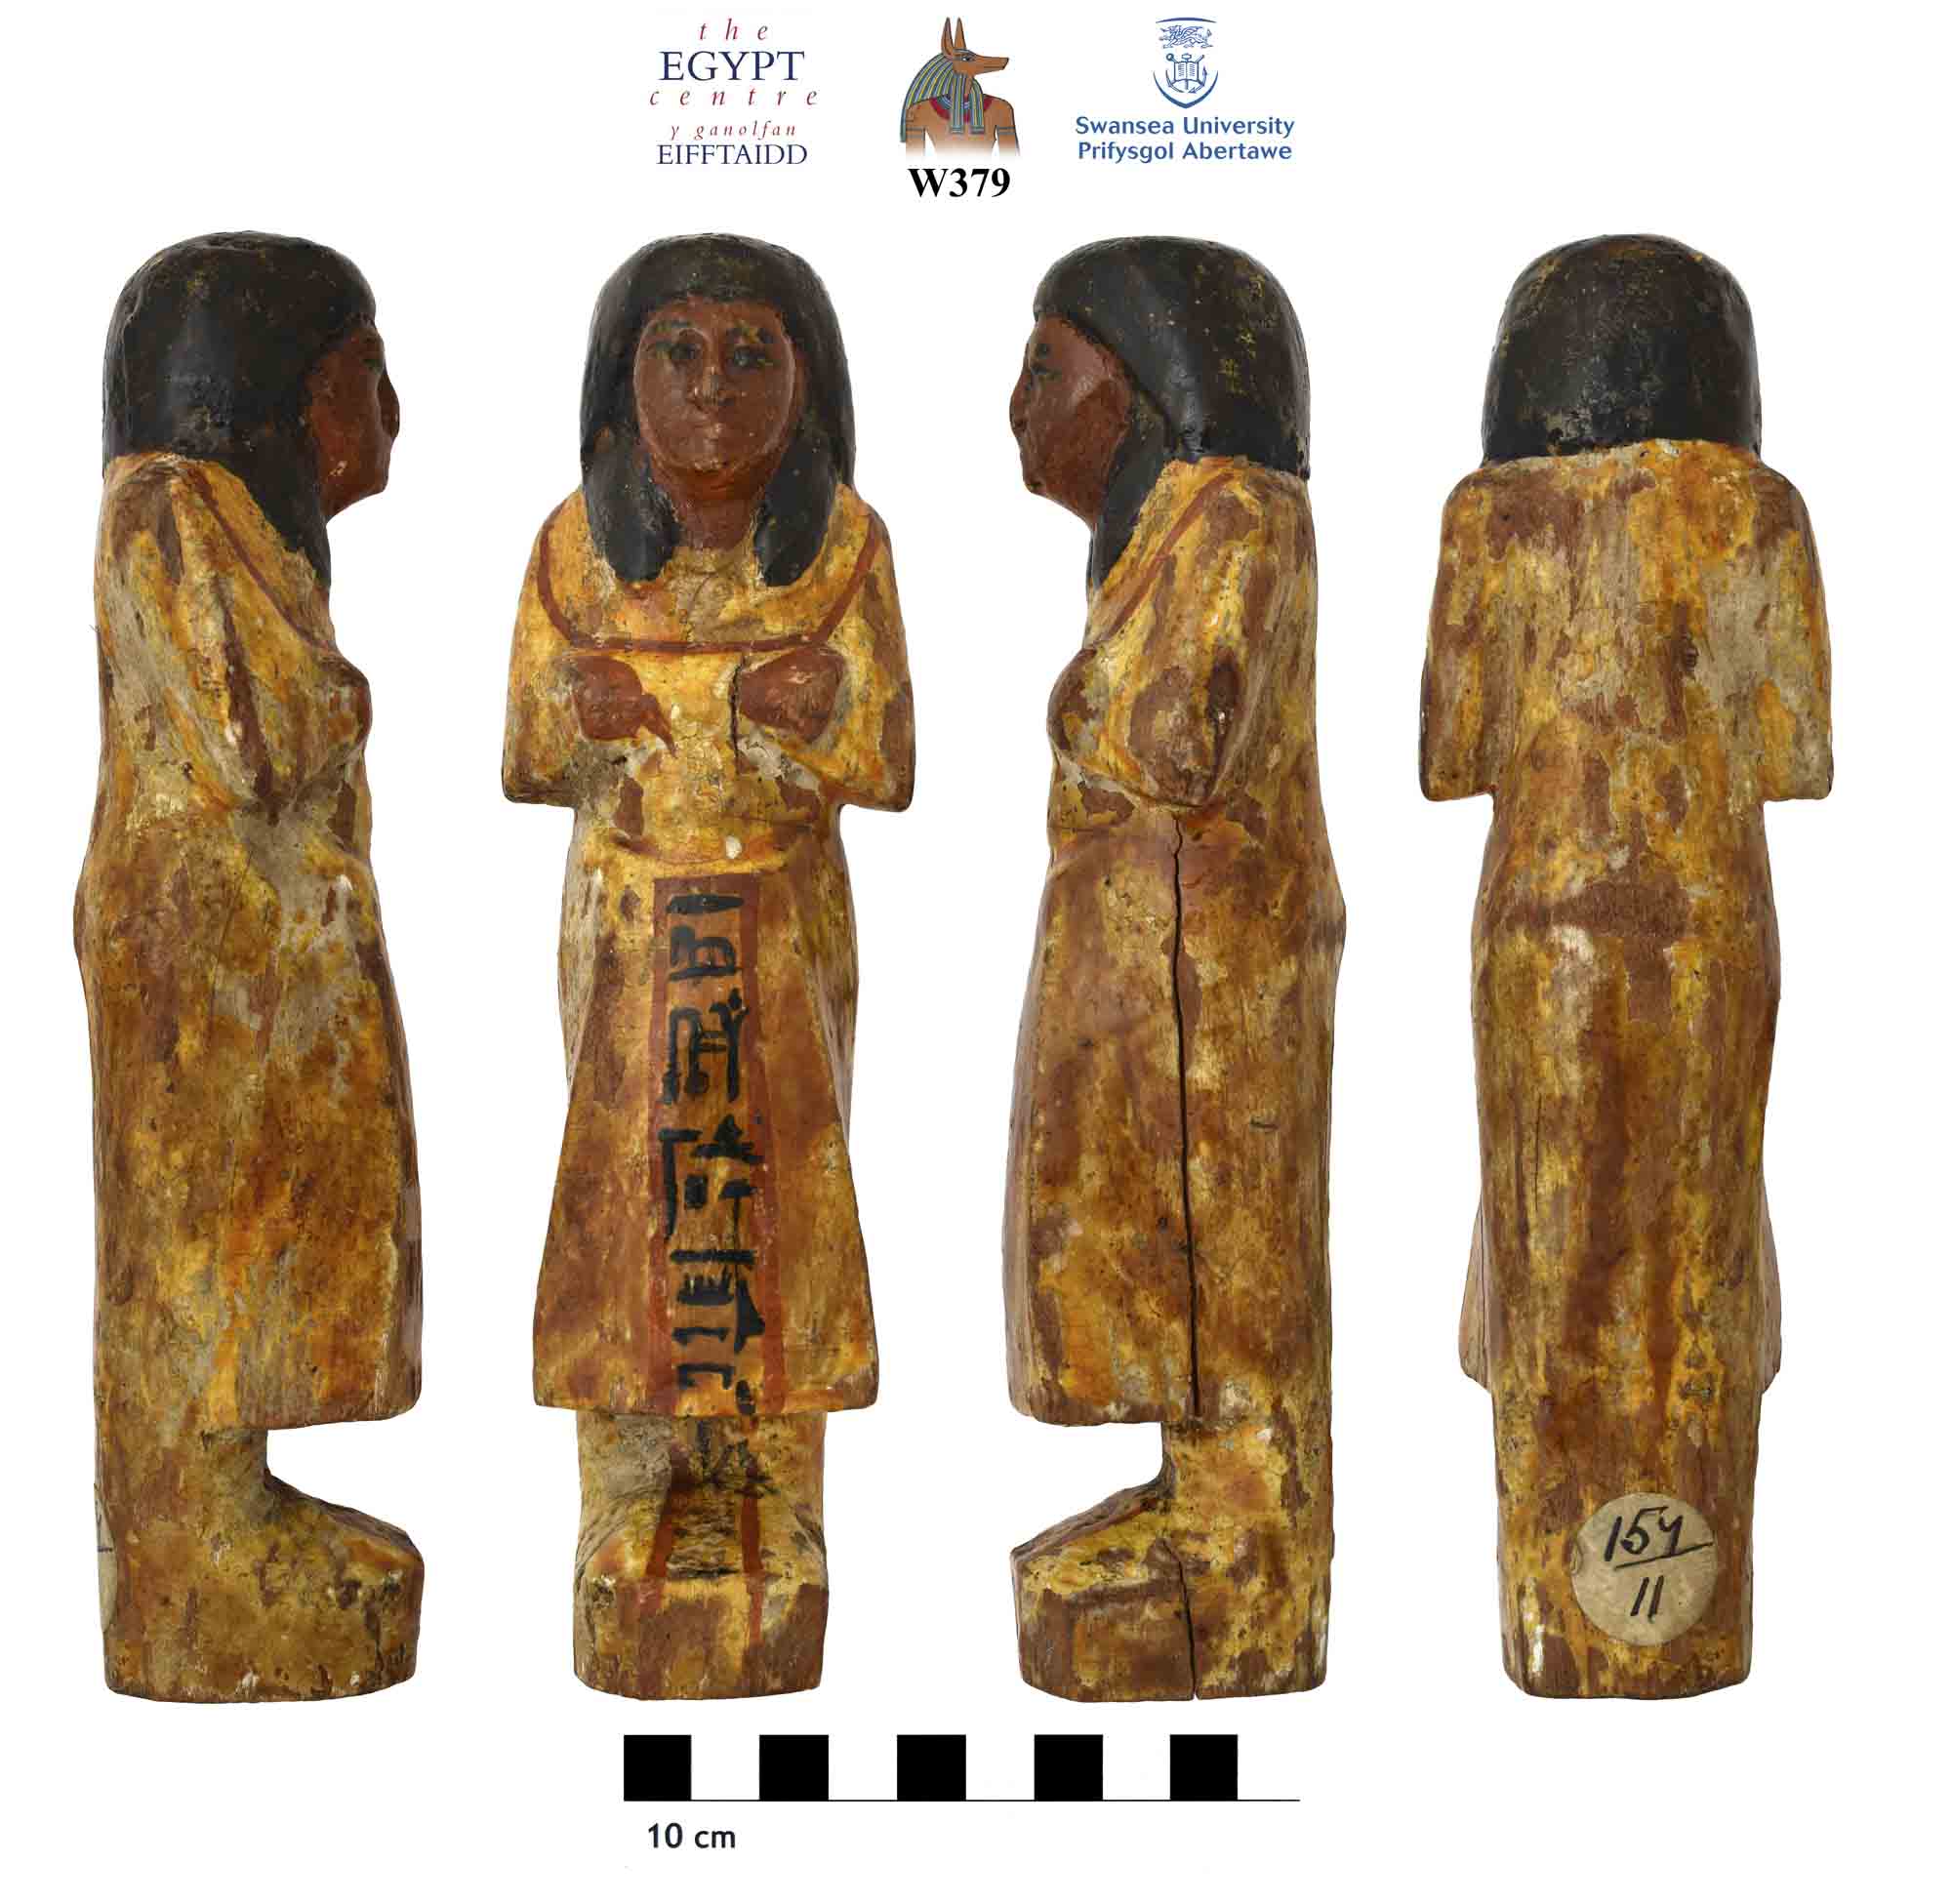 Image for: Overseer shabti